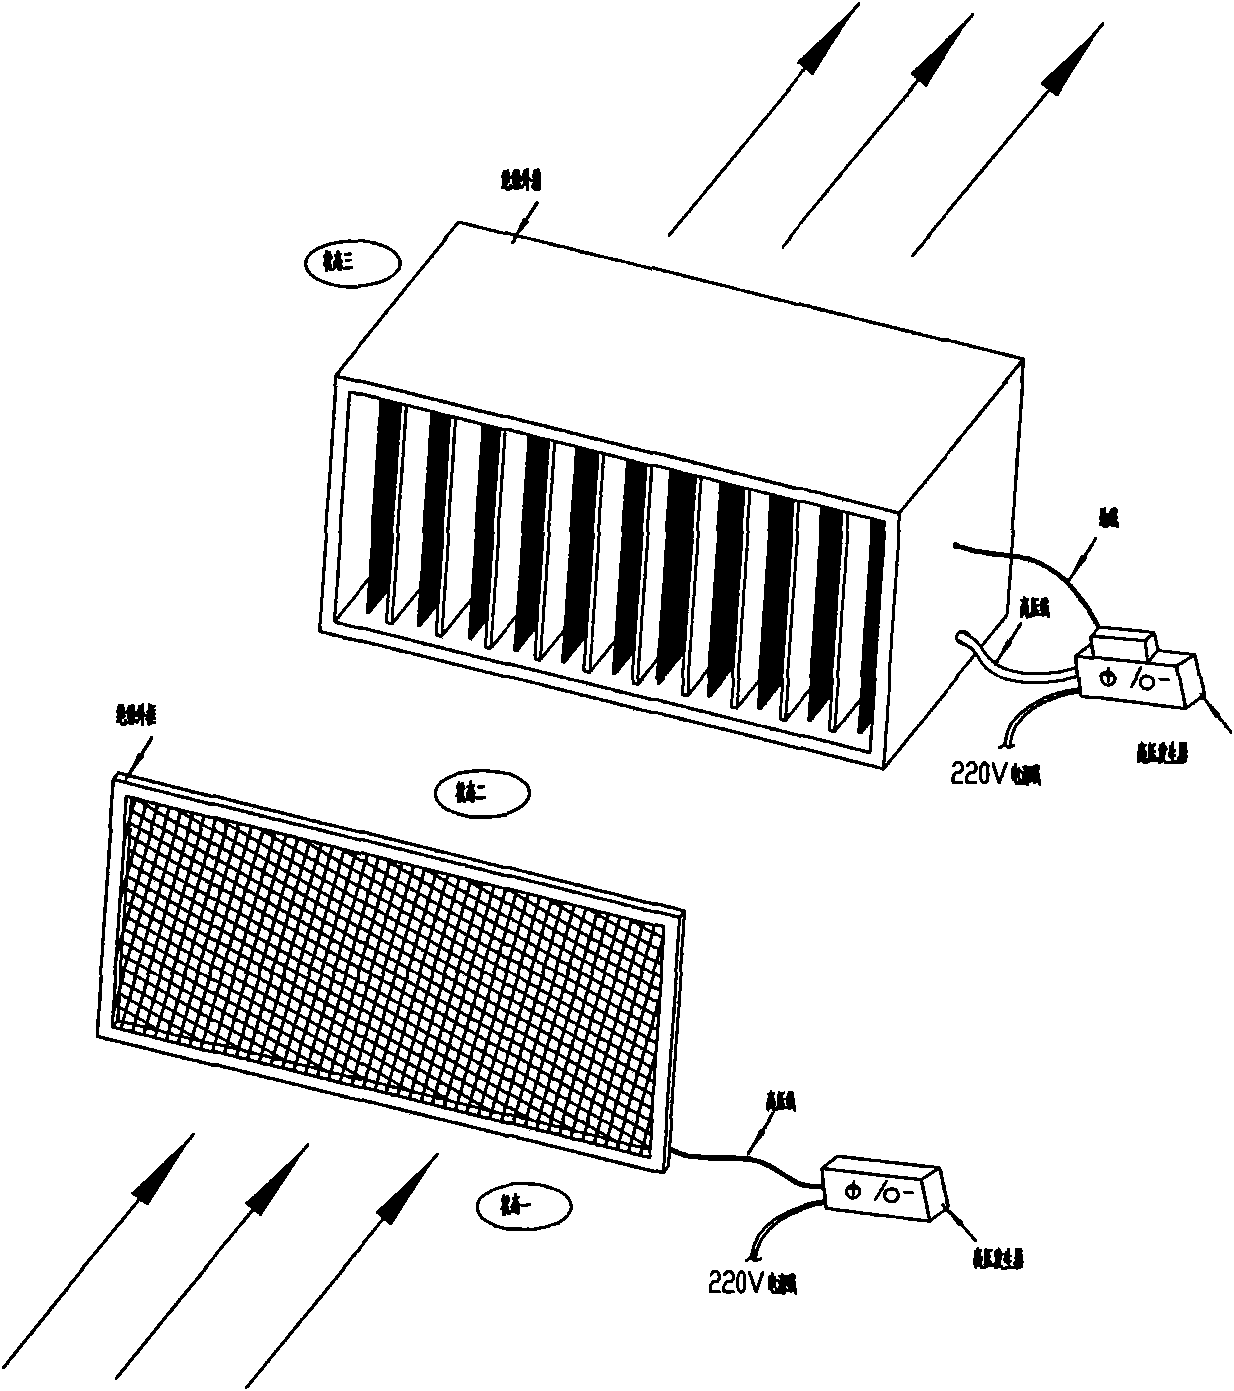 Method for purifying air